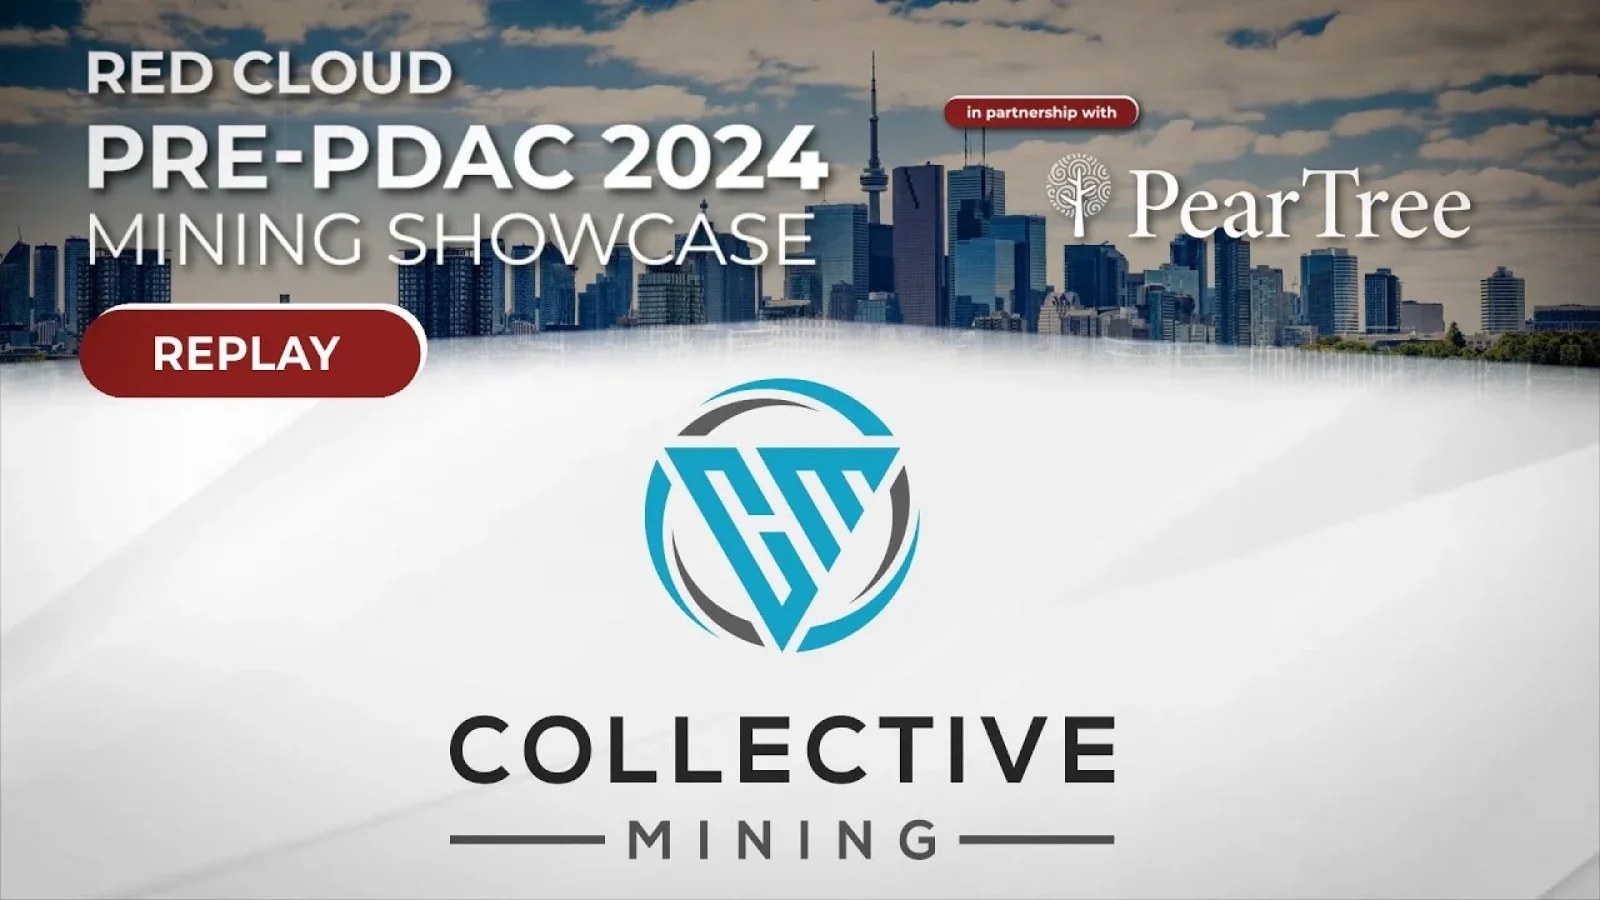 Collective mining